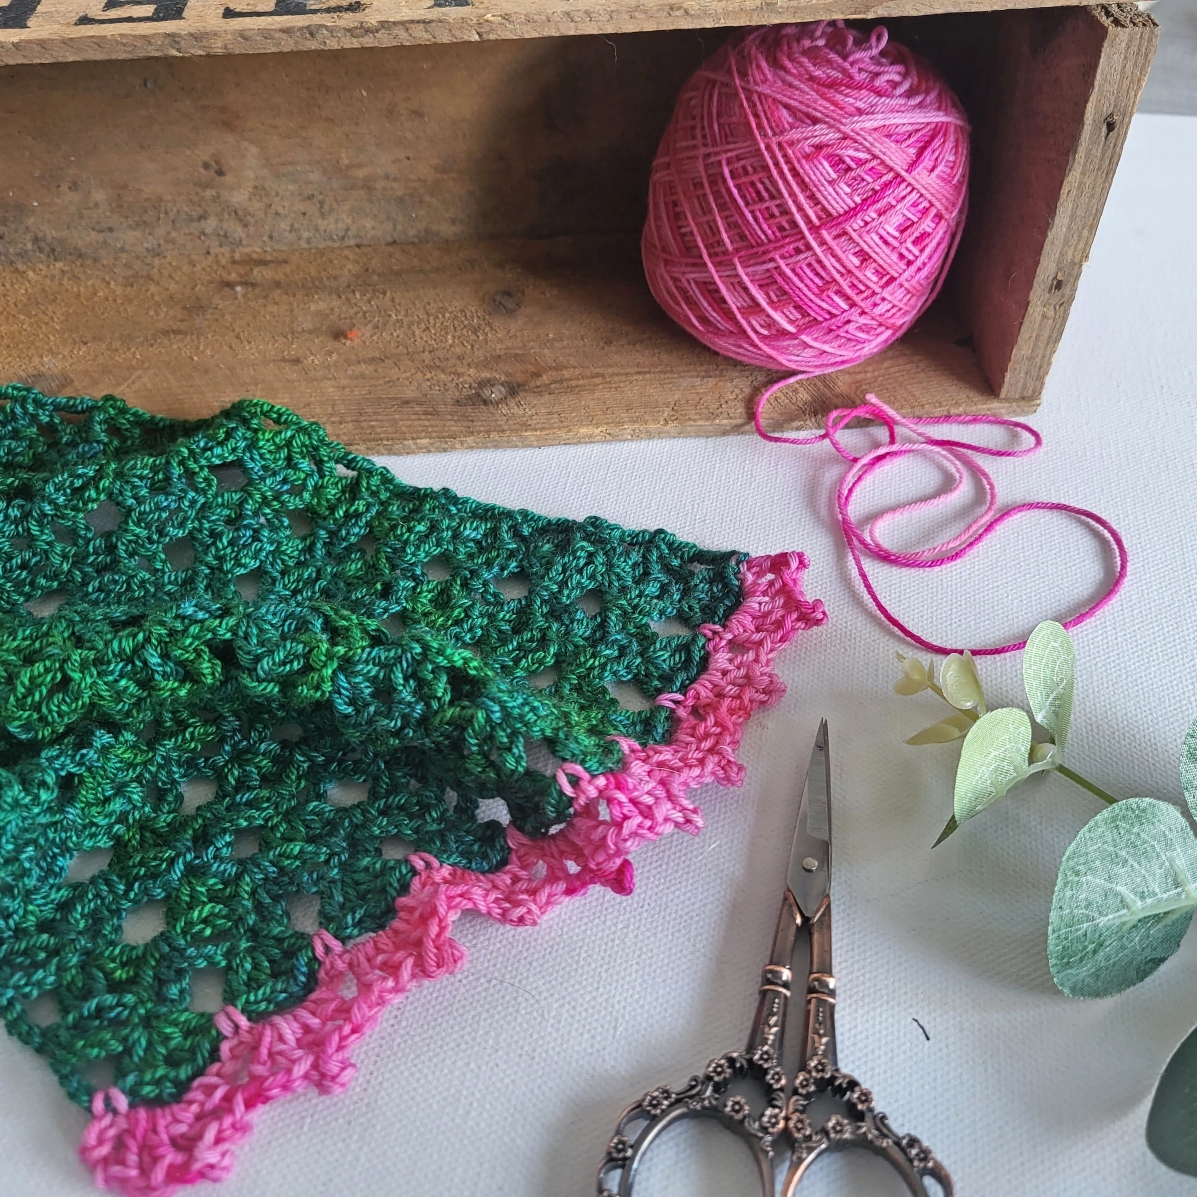 a green lace scarf and a ball of pink yarn on a desk